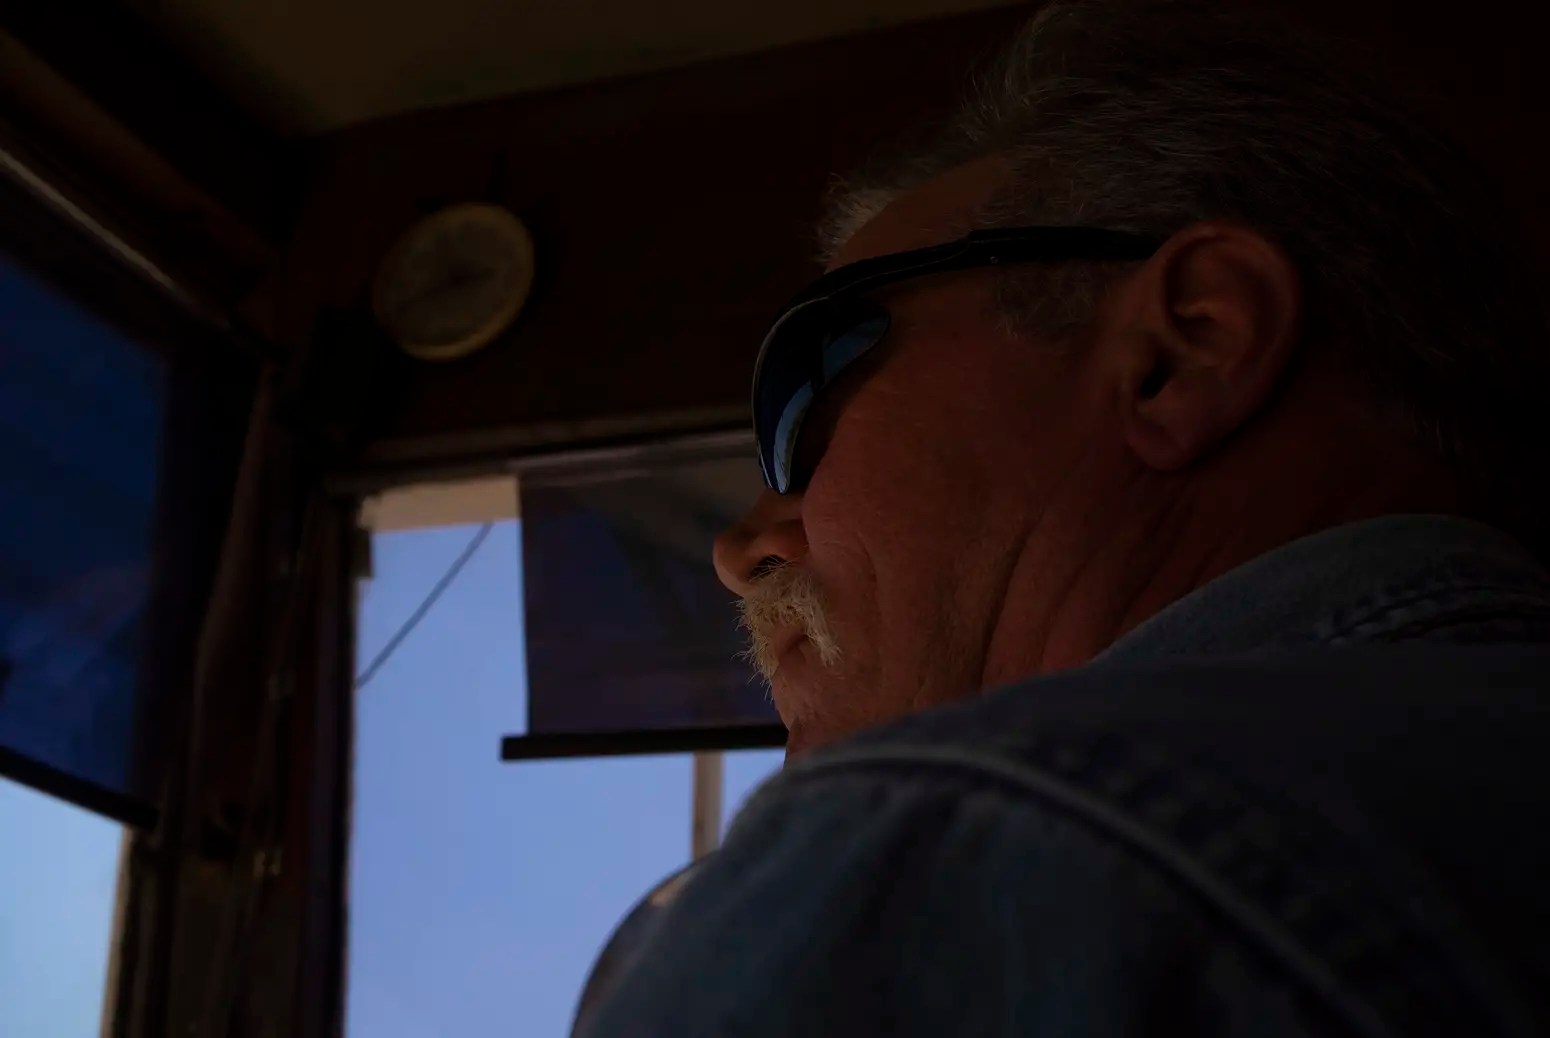 A portrait of an older man in sunglasses sitting in a truck.